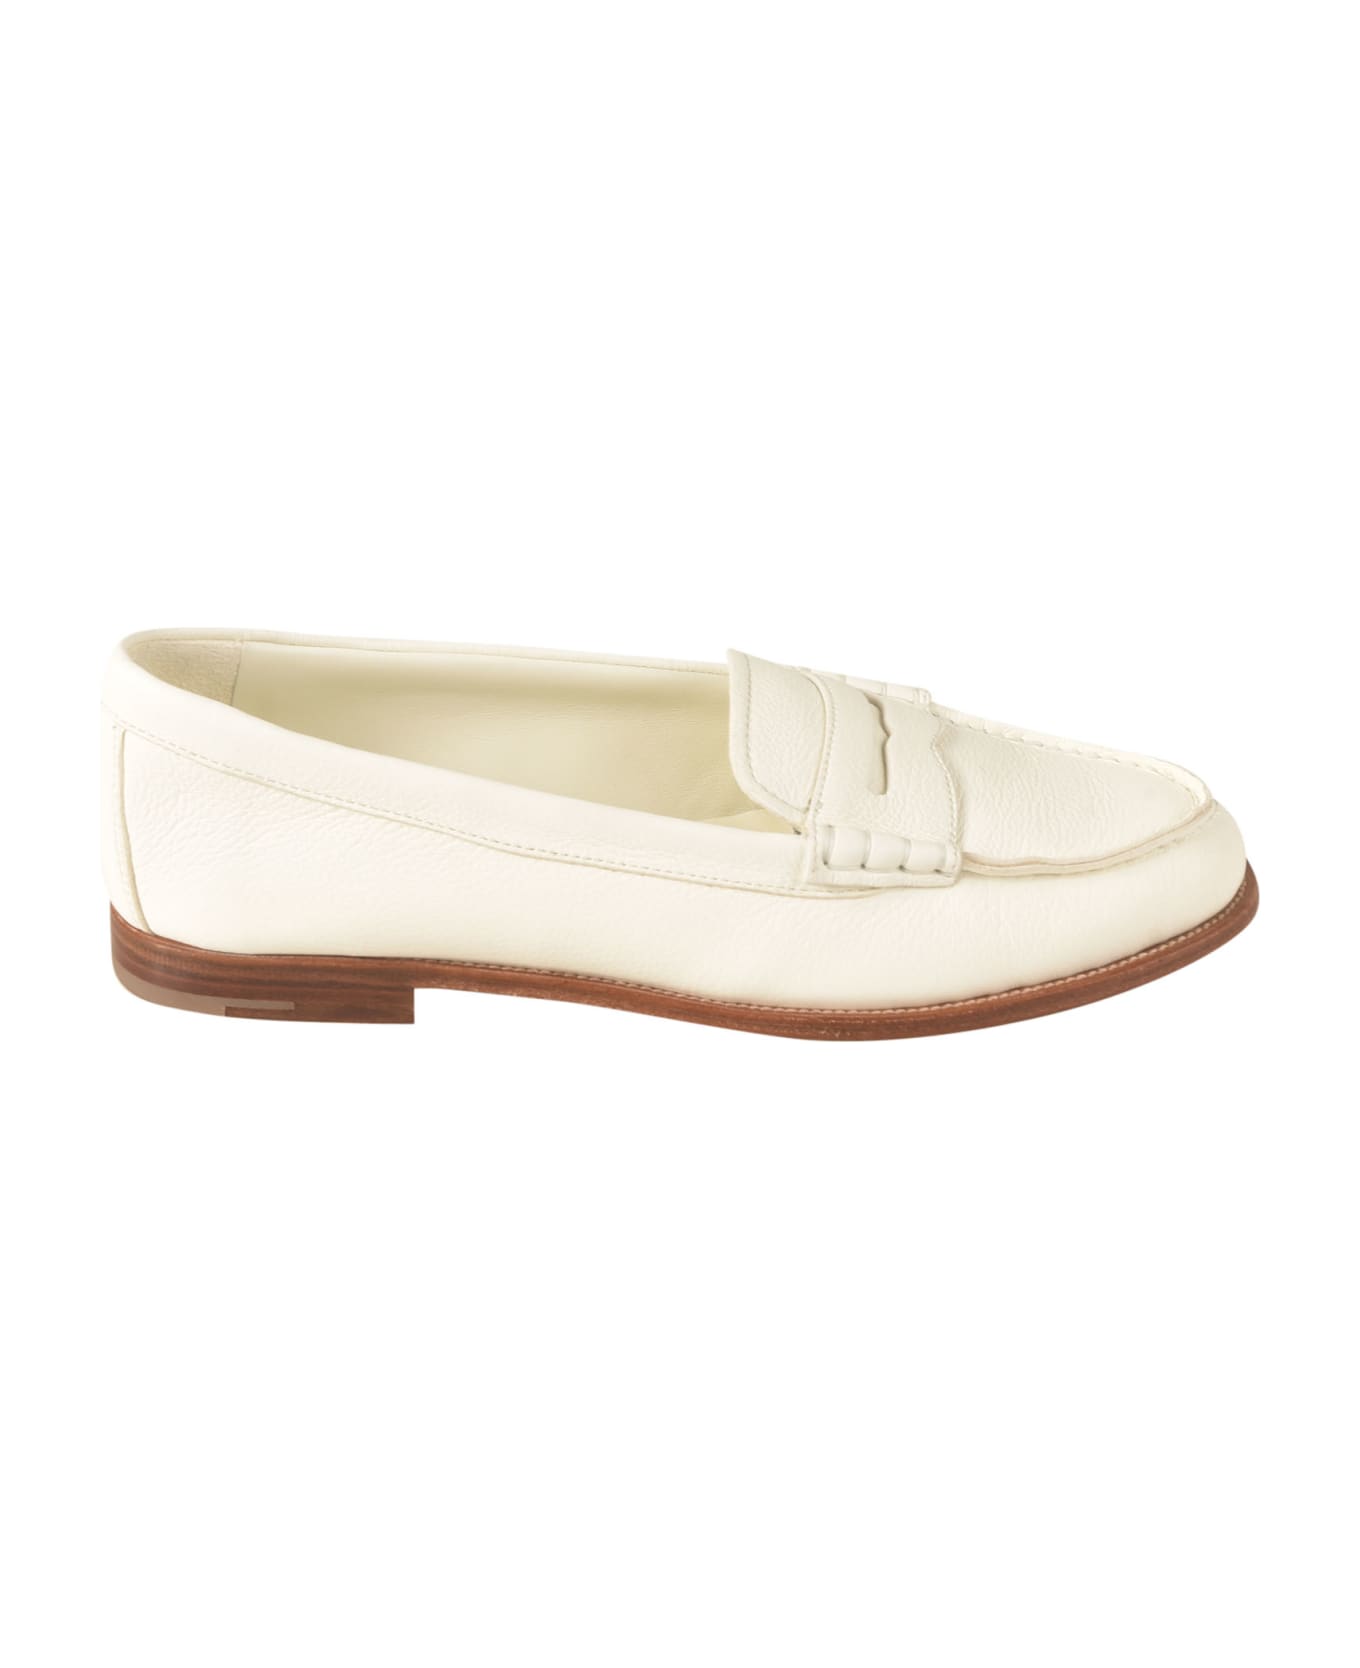 Church's Classic Loafers - Avorio